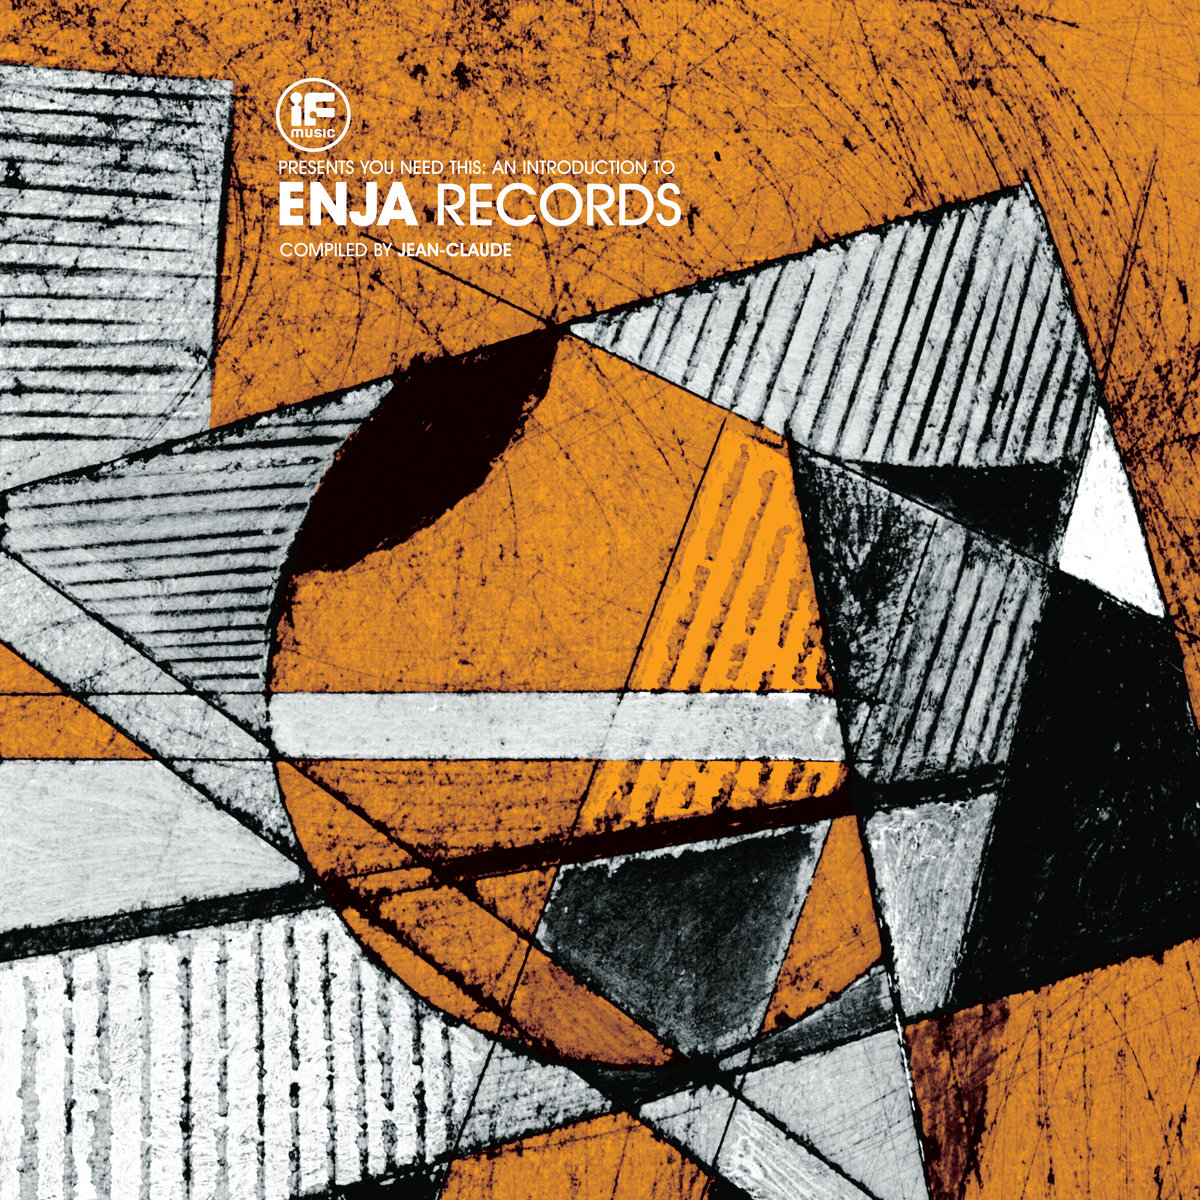 If Music Presents You Need This : An Introduction To Enja Records